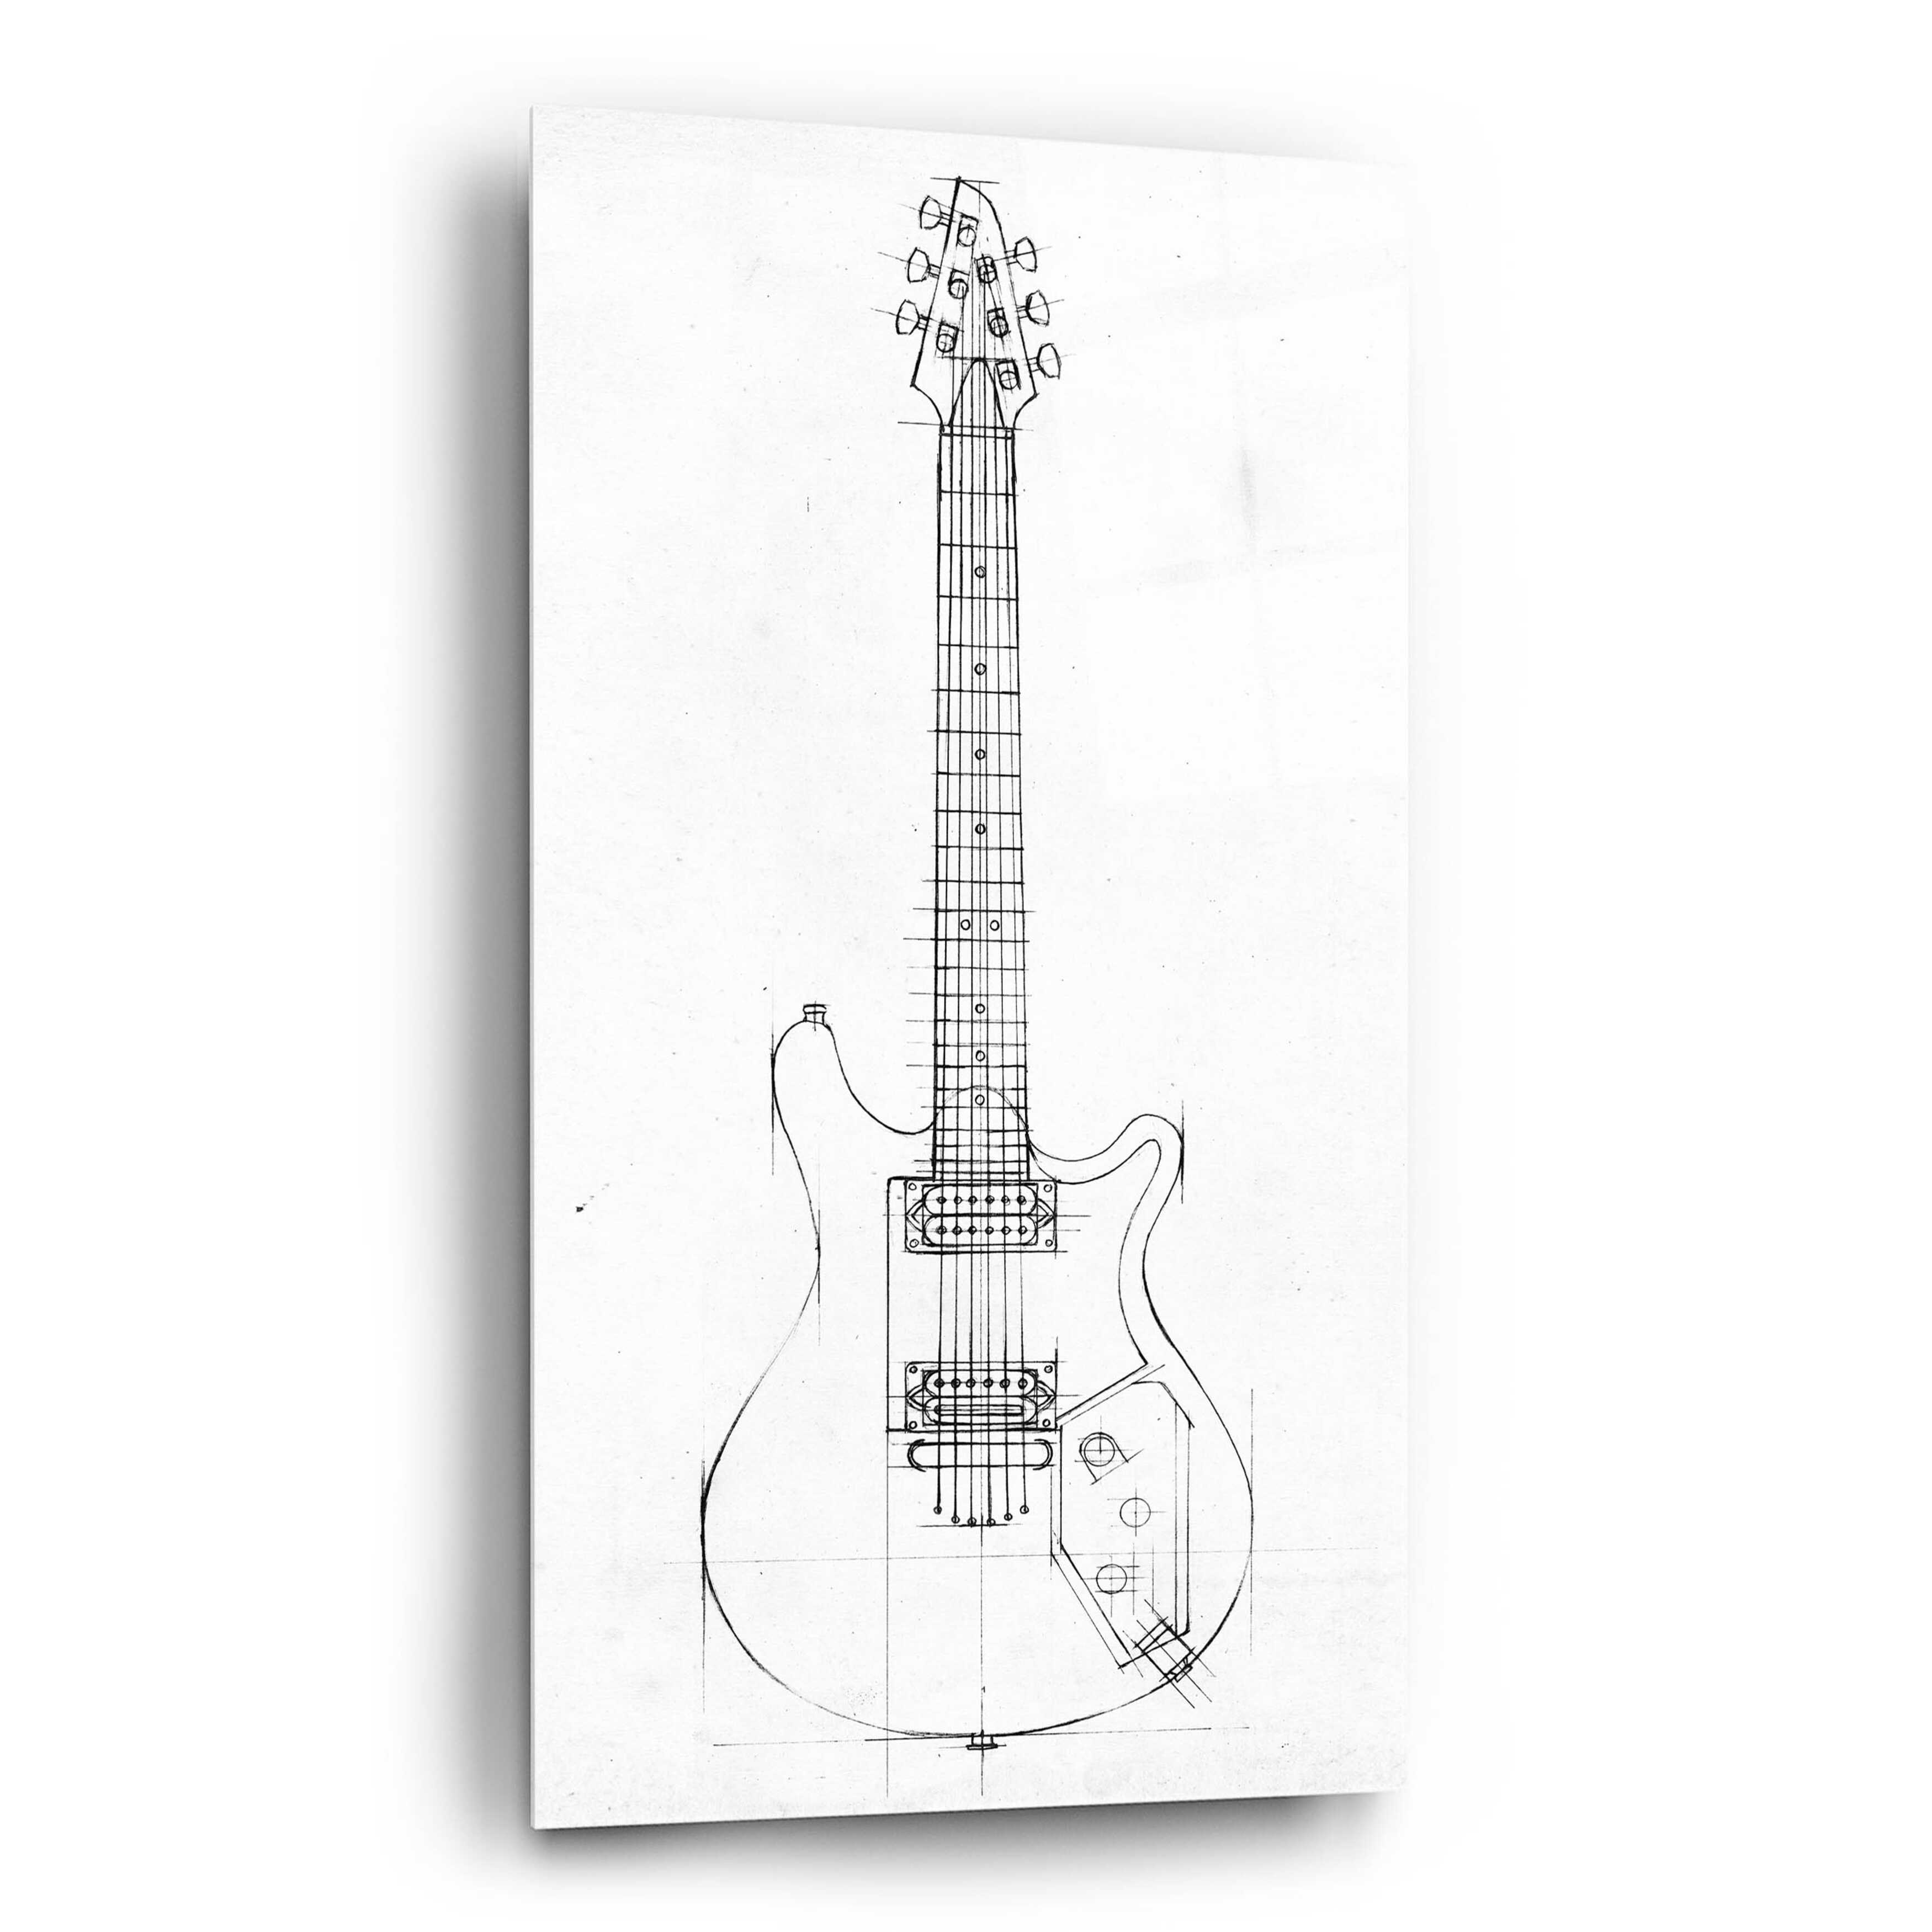 GUITAR COLLAGE Art Project | Drawing & Painting for Hispanic Heritage Month